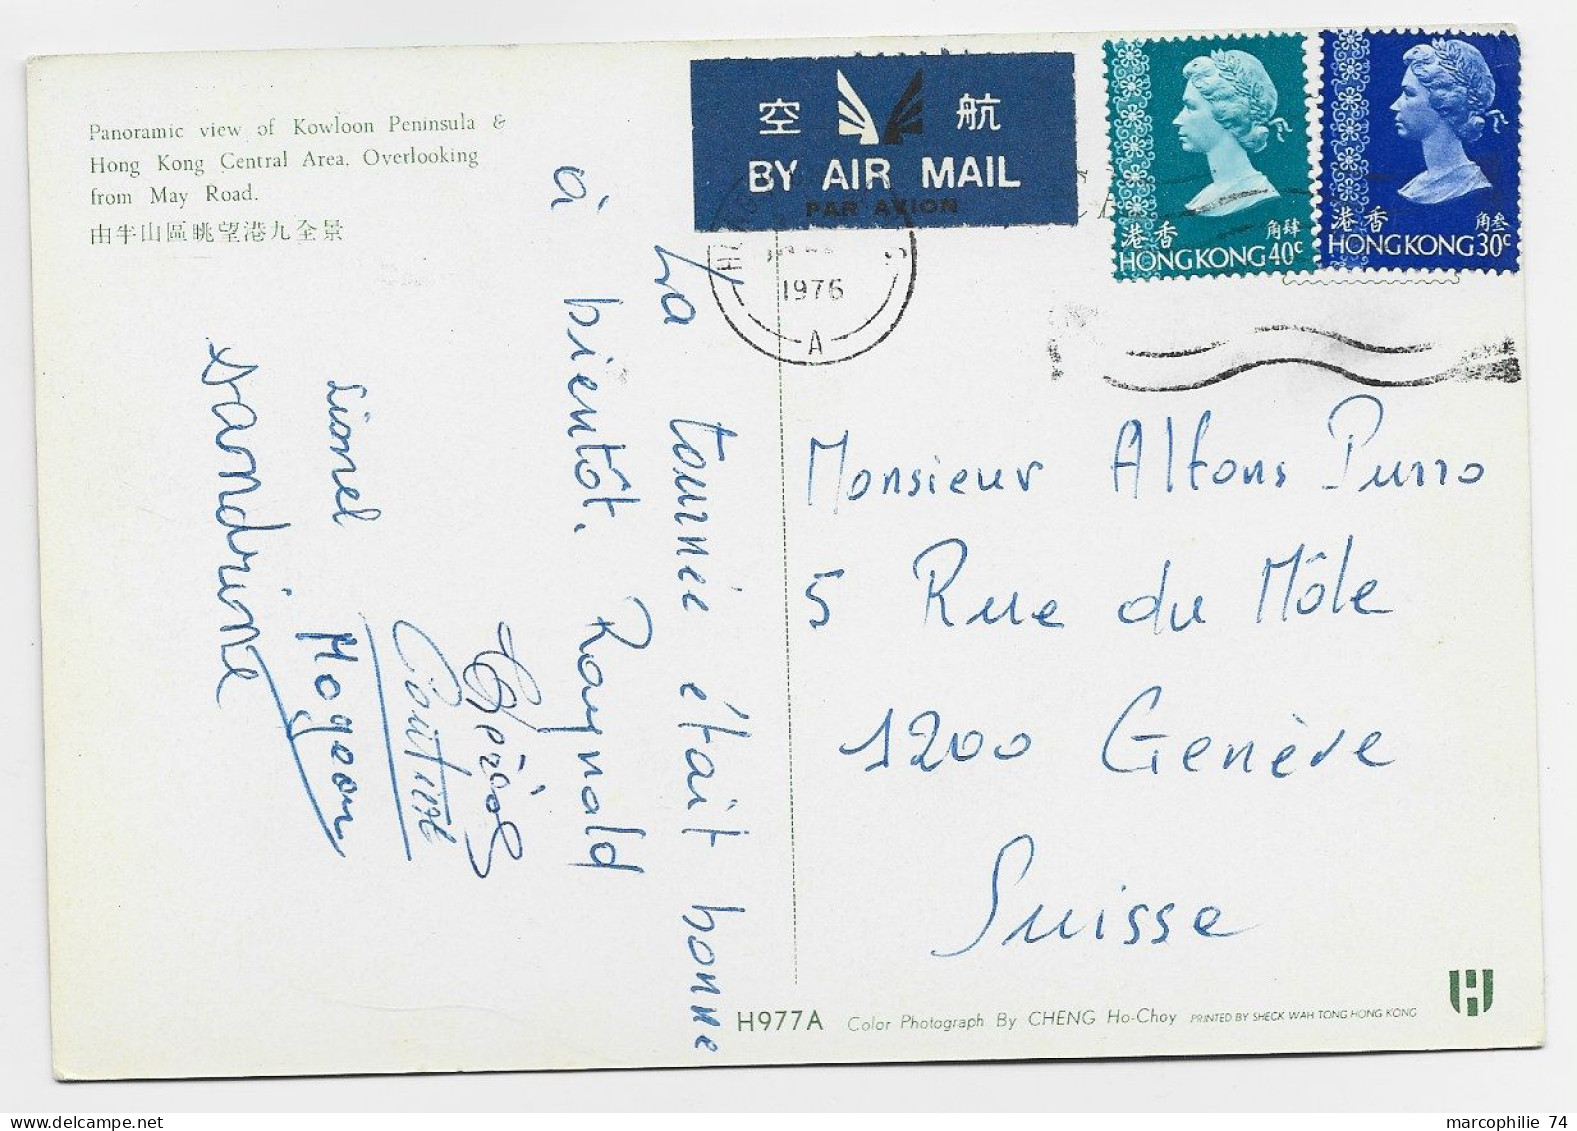 HONG KONG 40C+30C CARD AIR MAIL 1976 TO SUISSE - Covers & Documents